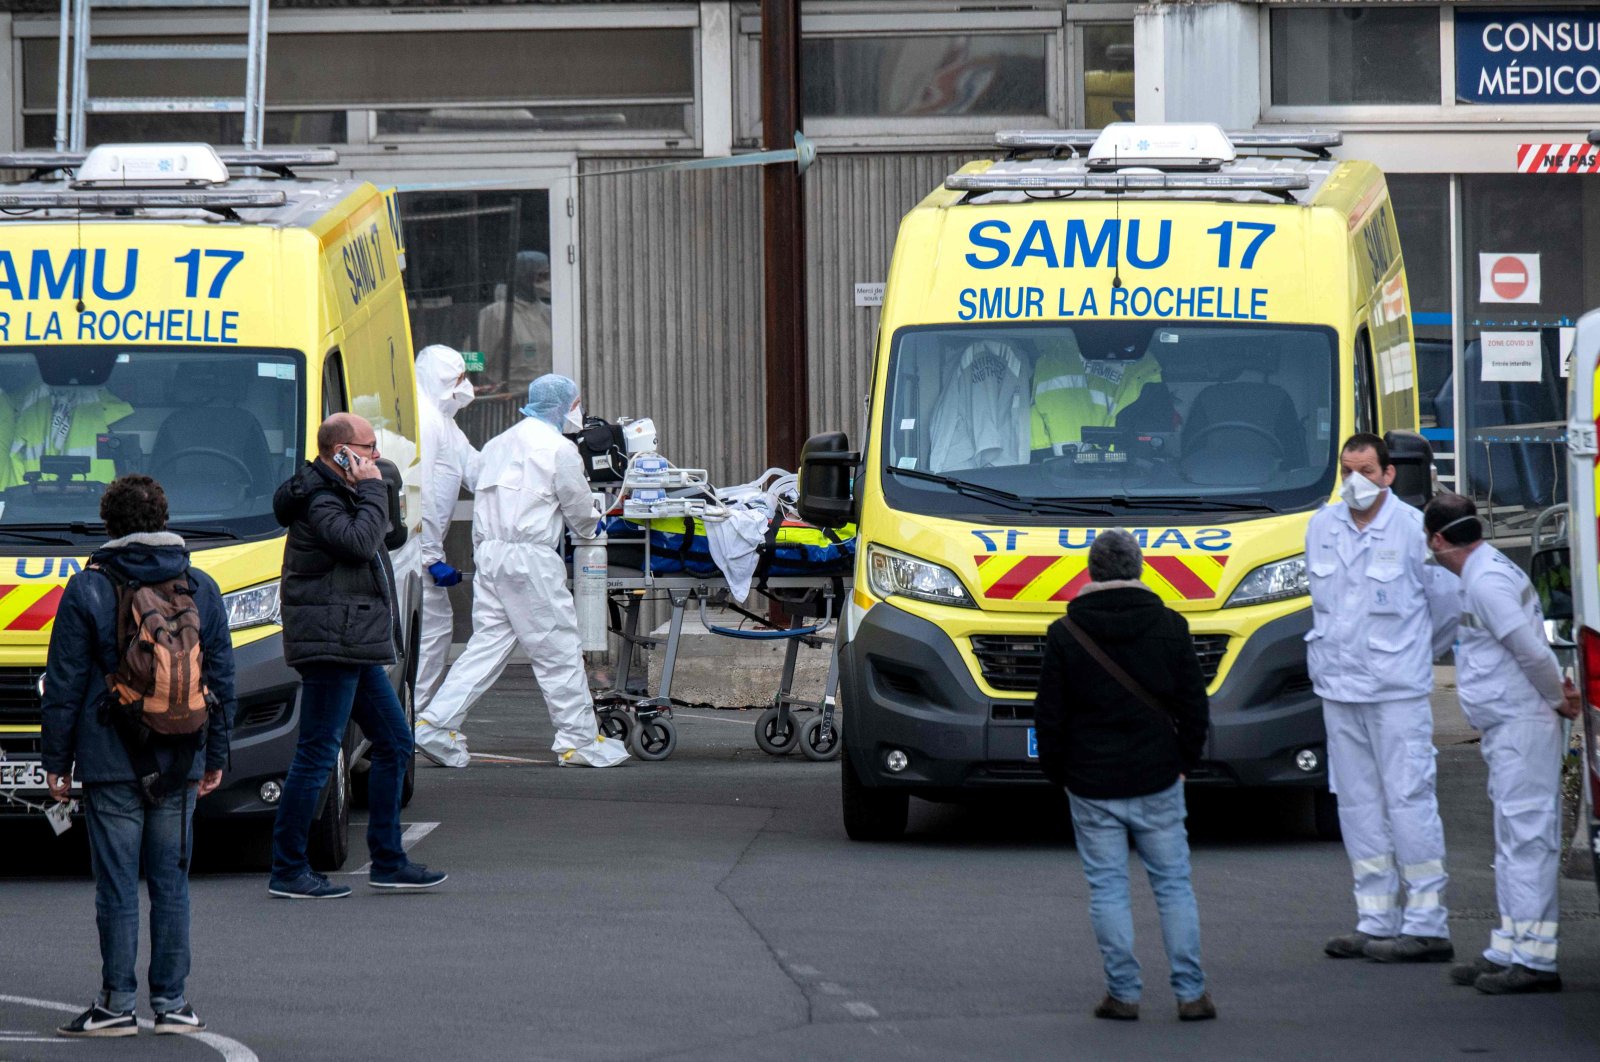 Emergency workers escort infected patients to the Saint-Louis hospital in La Rochelle, France, Friday, April 3, 2020. (AFP Photo)